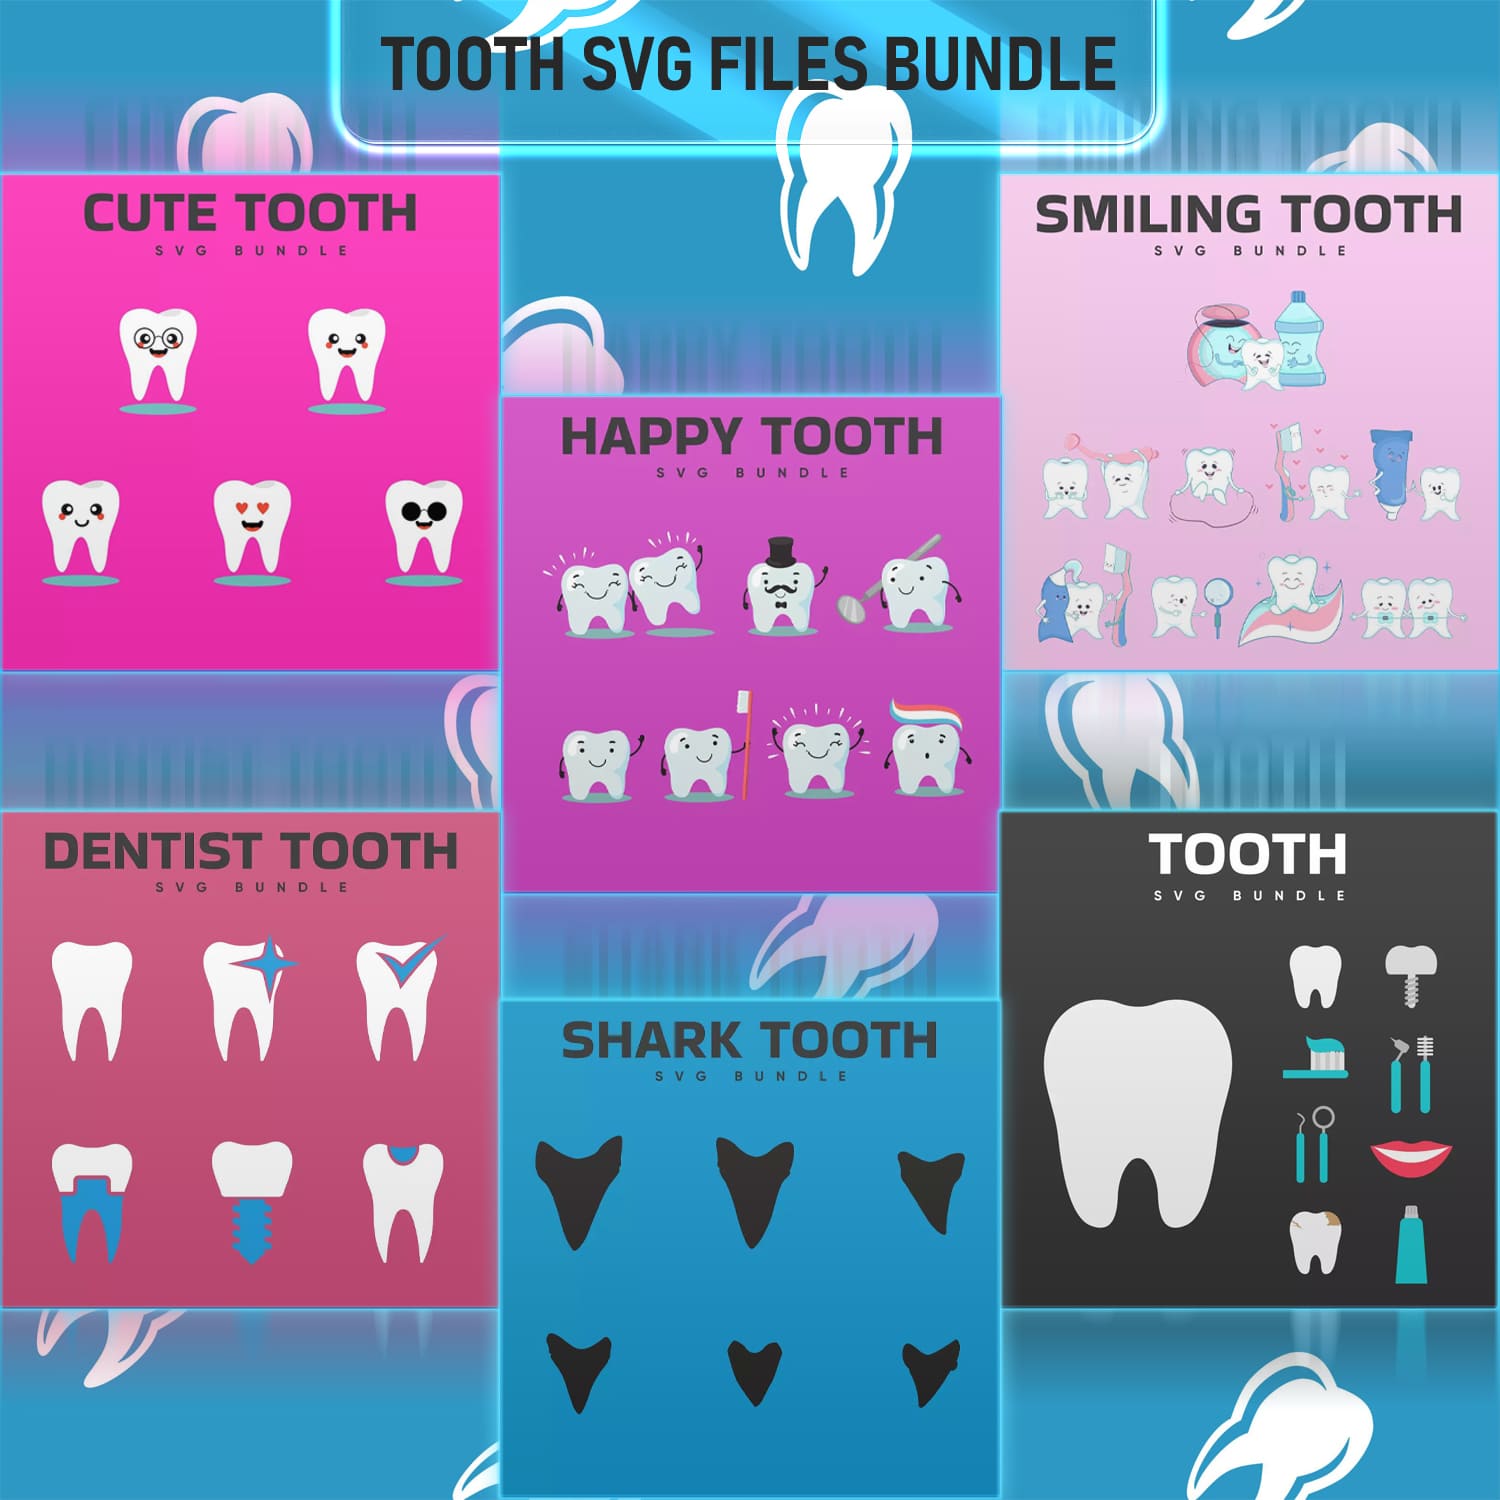 Tooth SVG Files Bundle cover image.